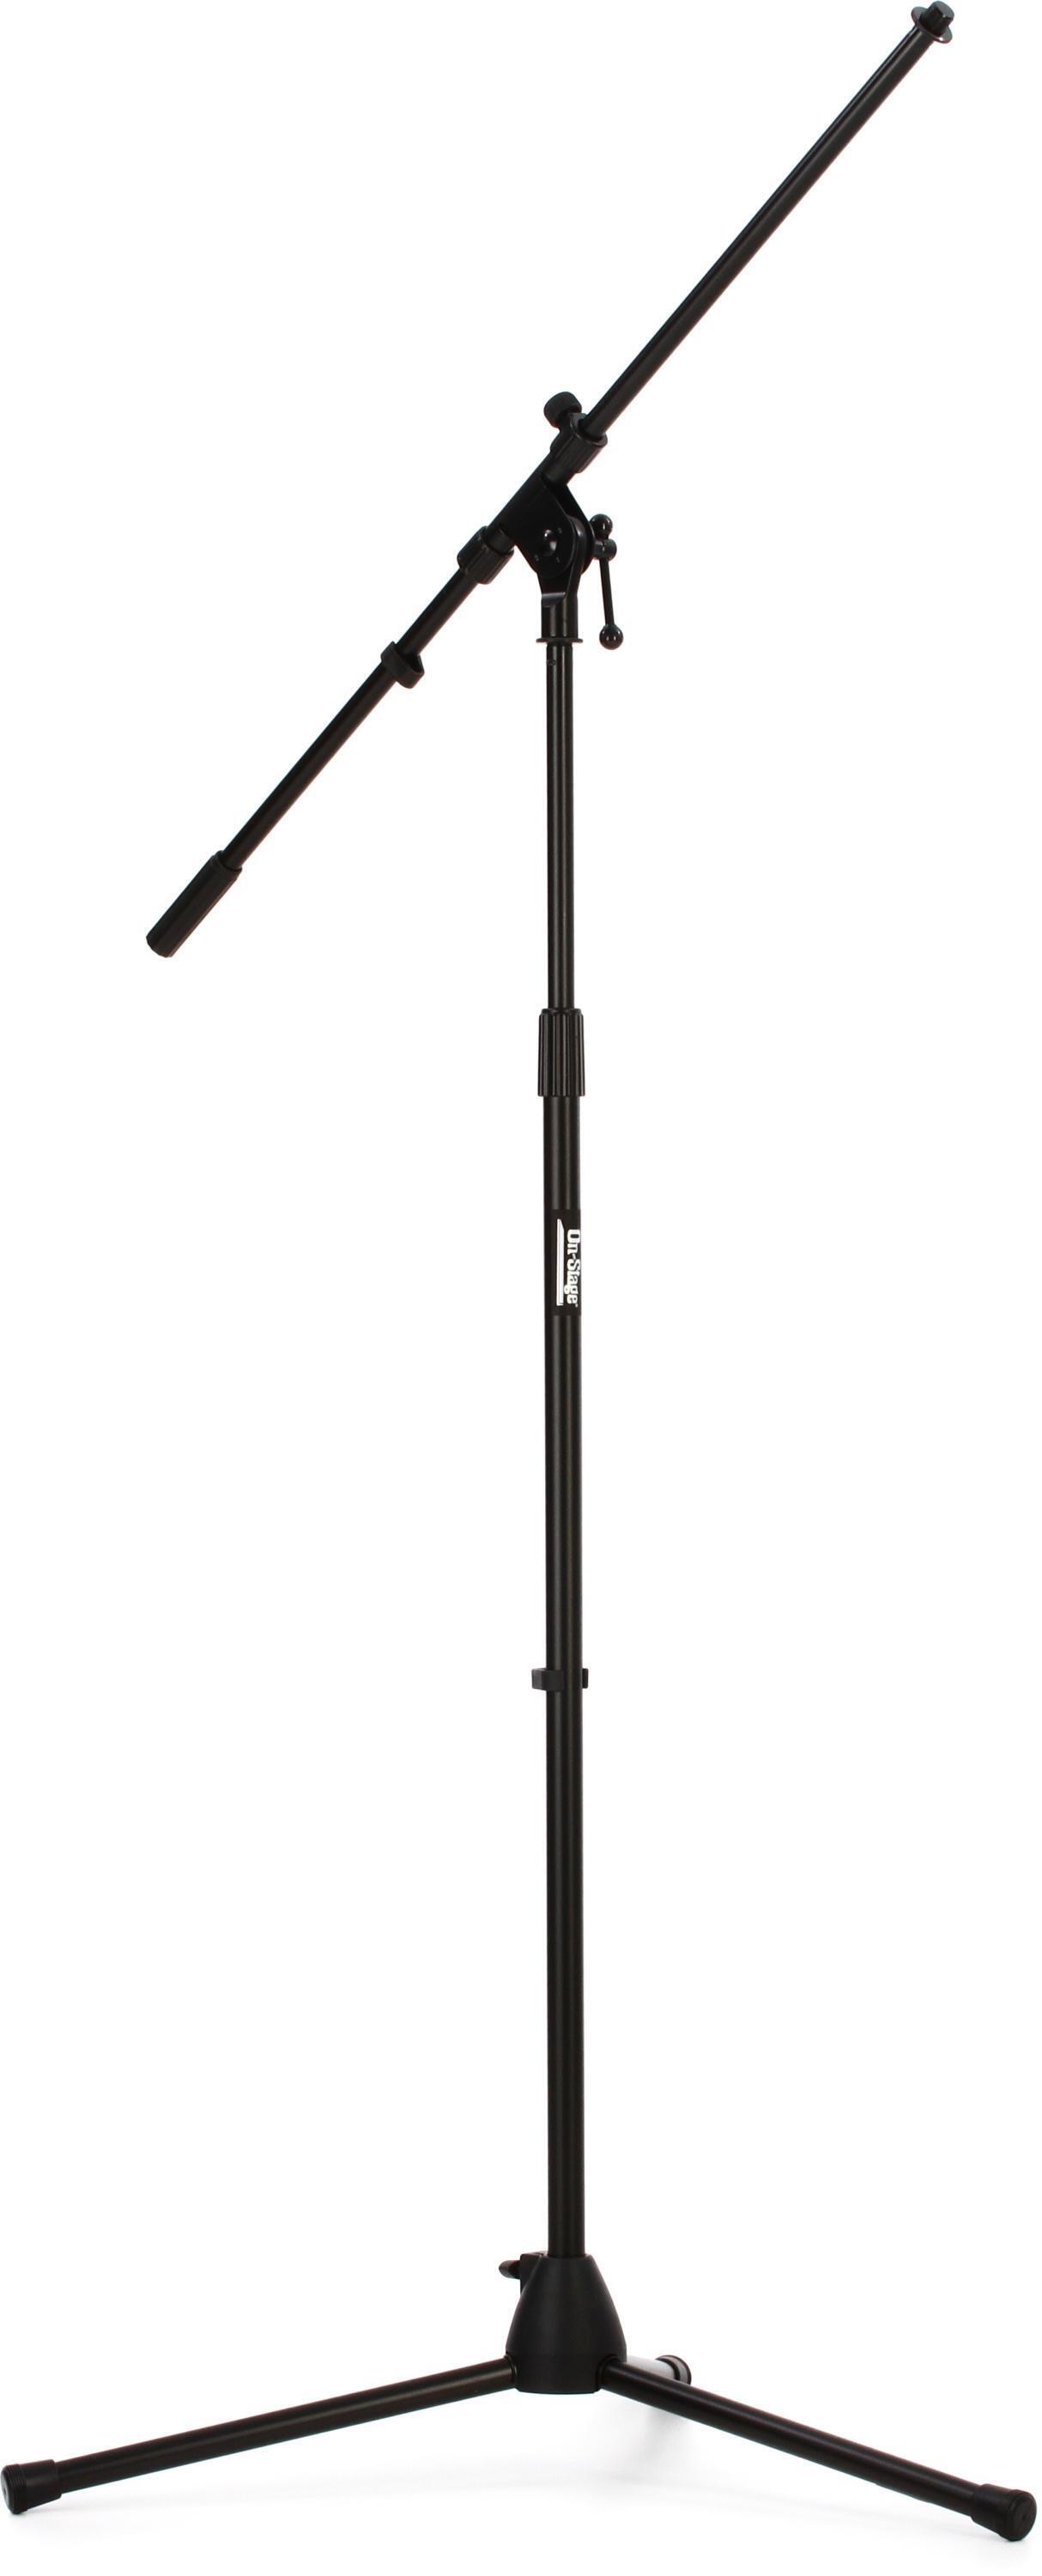 Shure 565SD Cardioid Dynamic Vocal Microphone with Cable and Stand